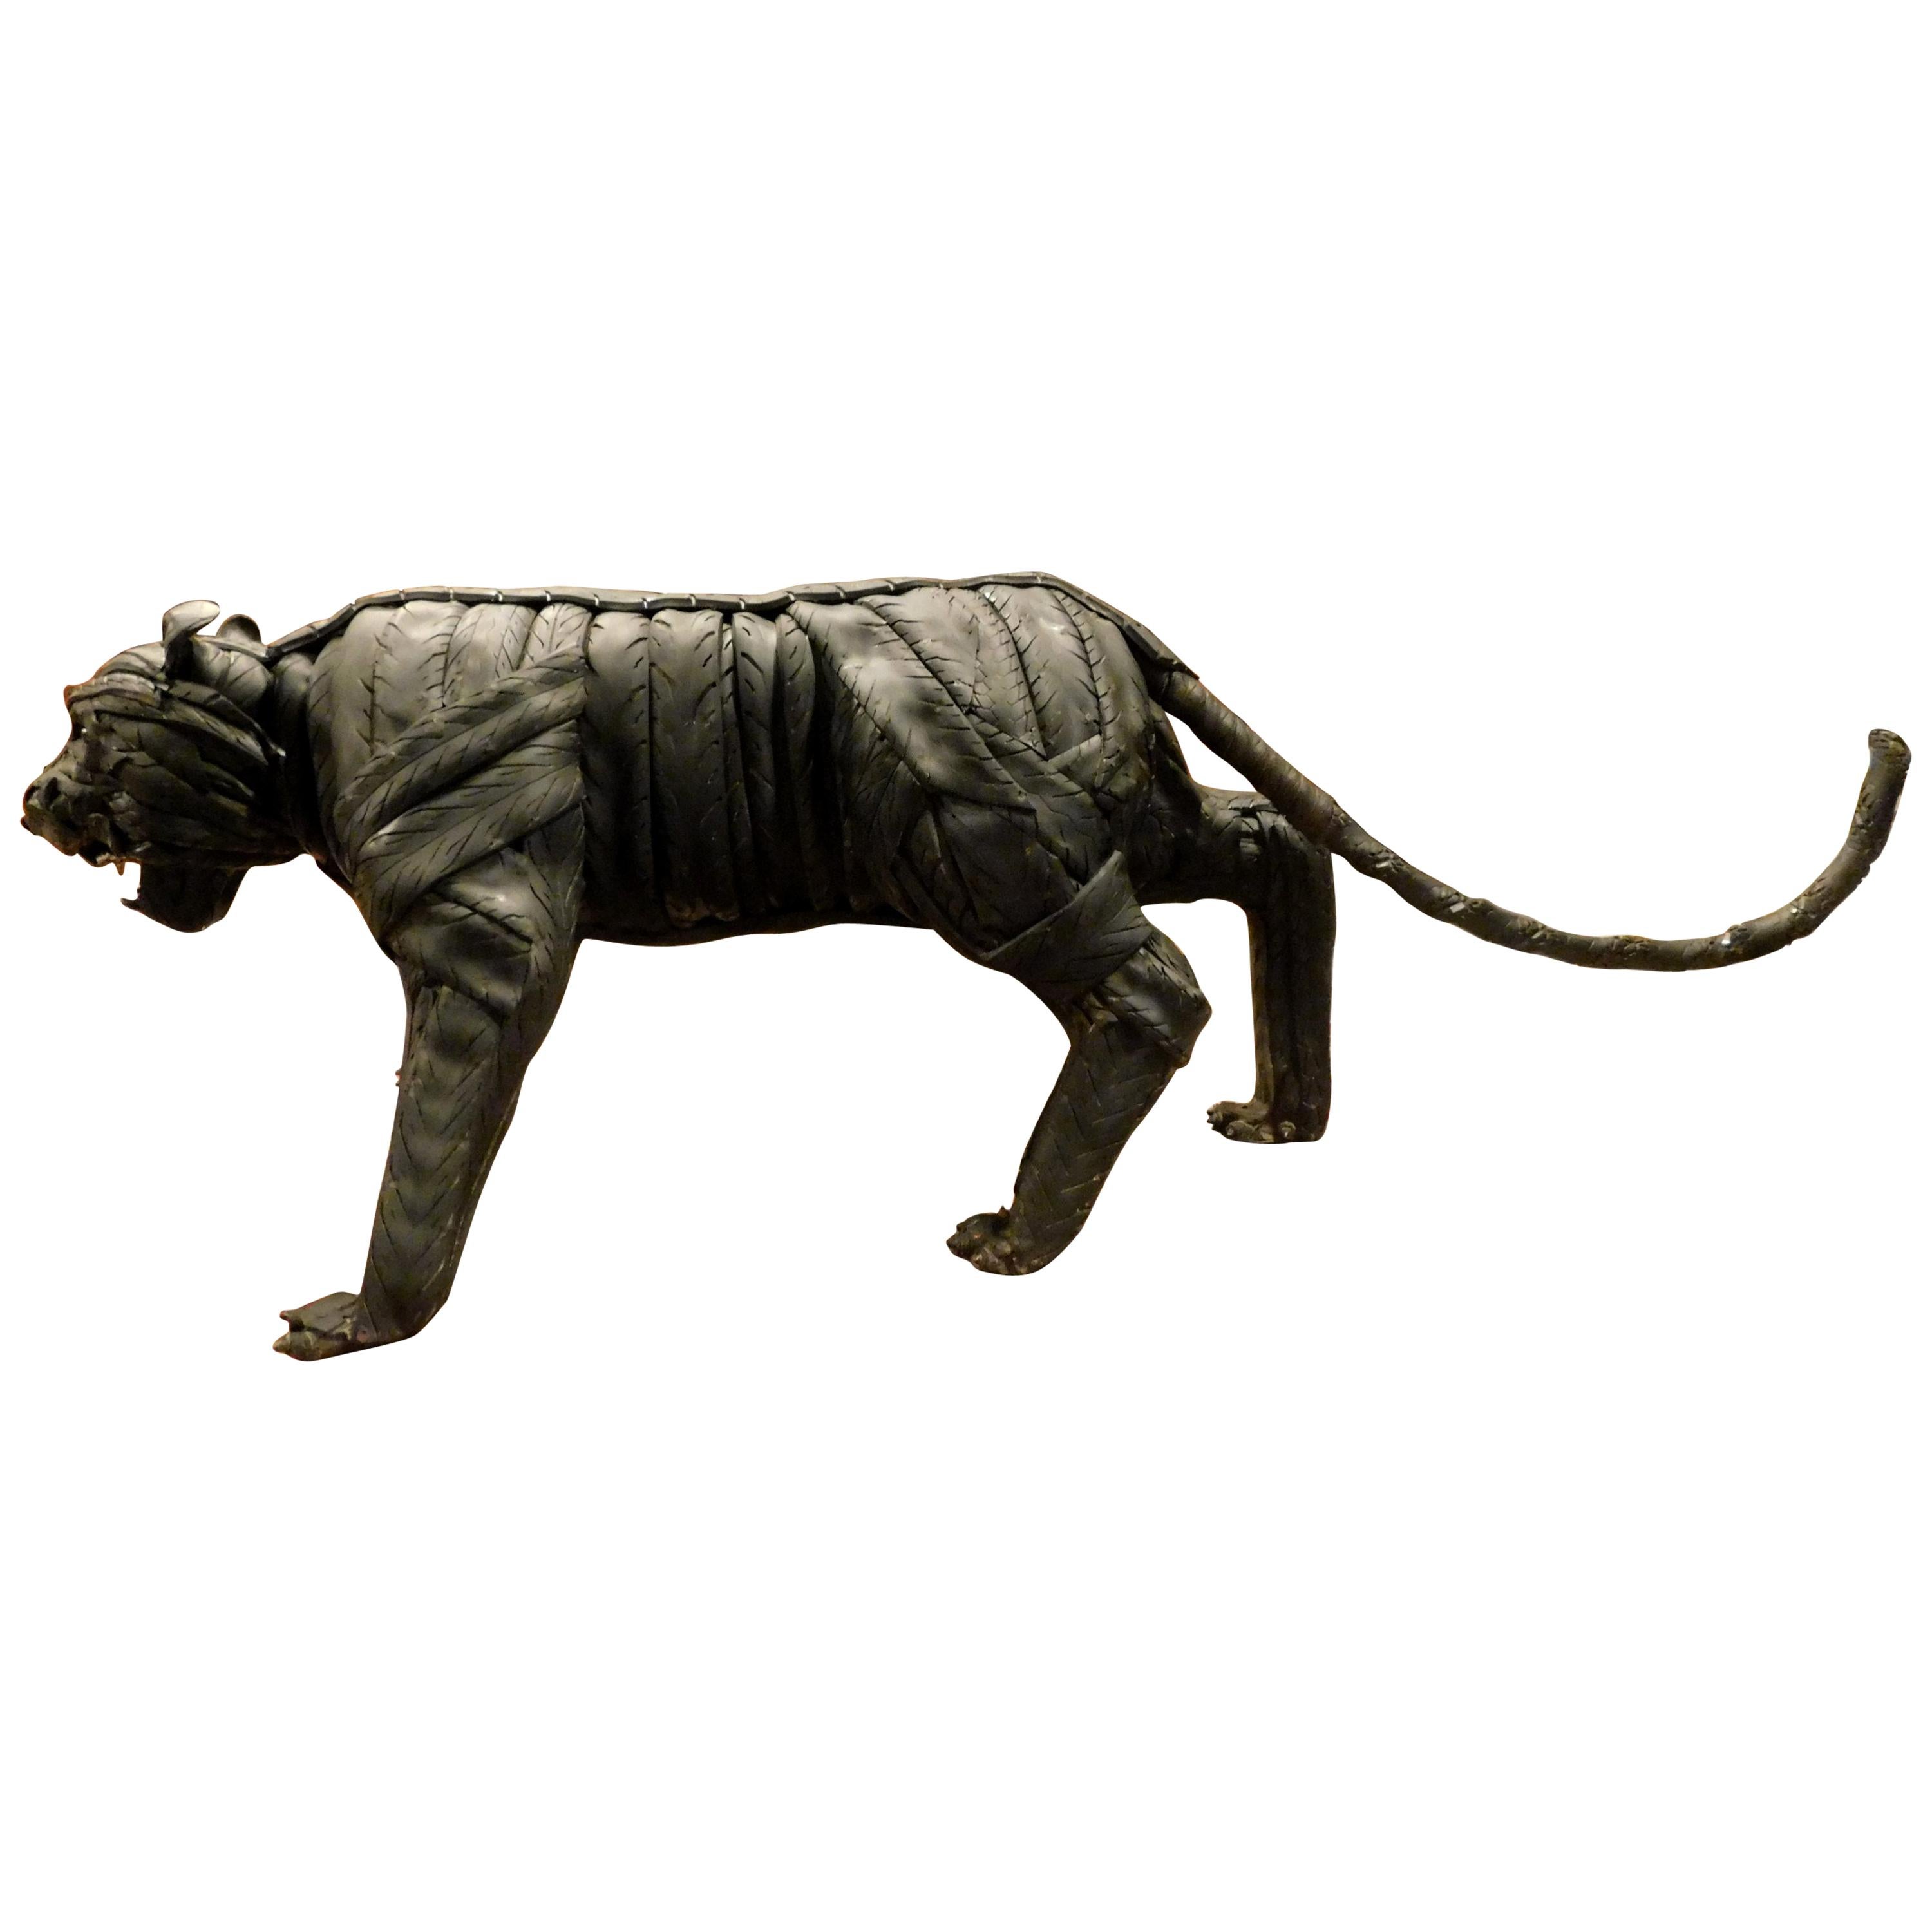 Black Panther Statue of Reused Tire, Italian Art, 1900